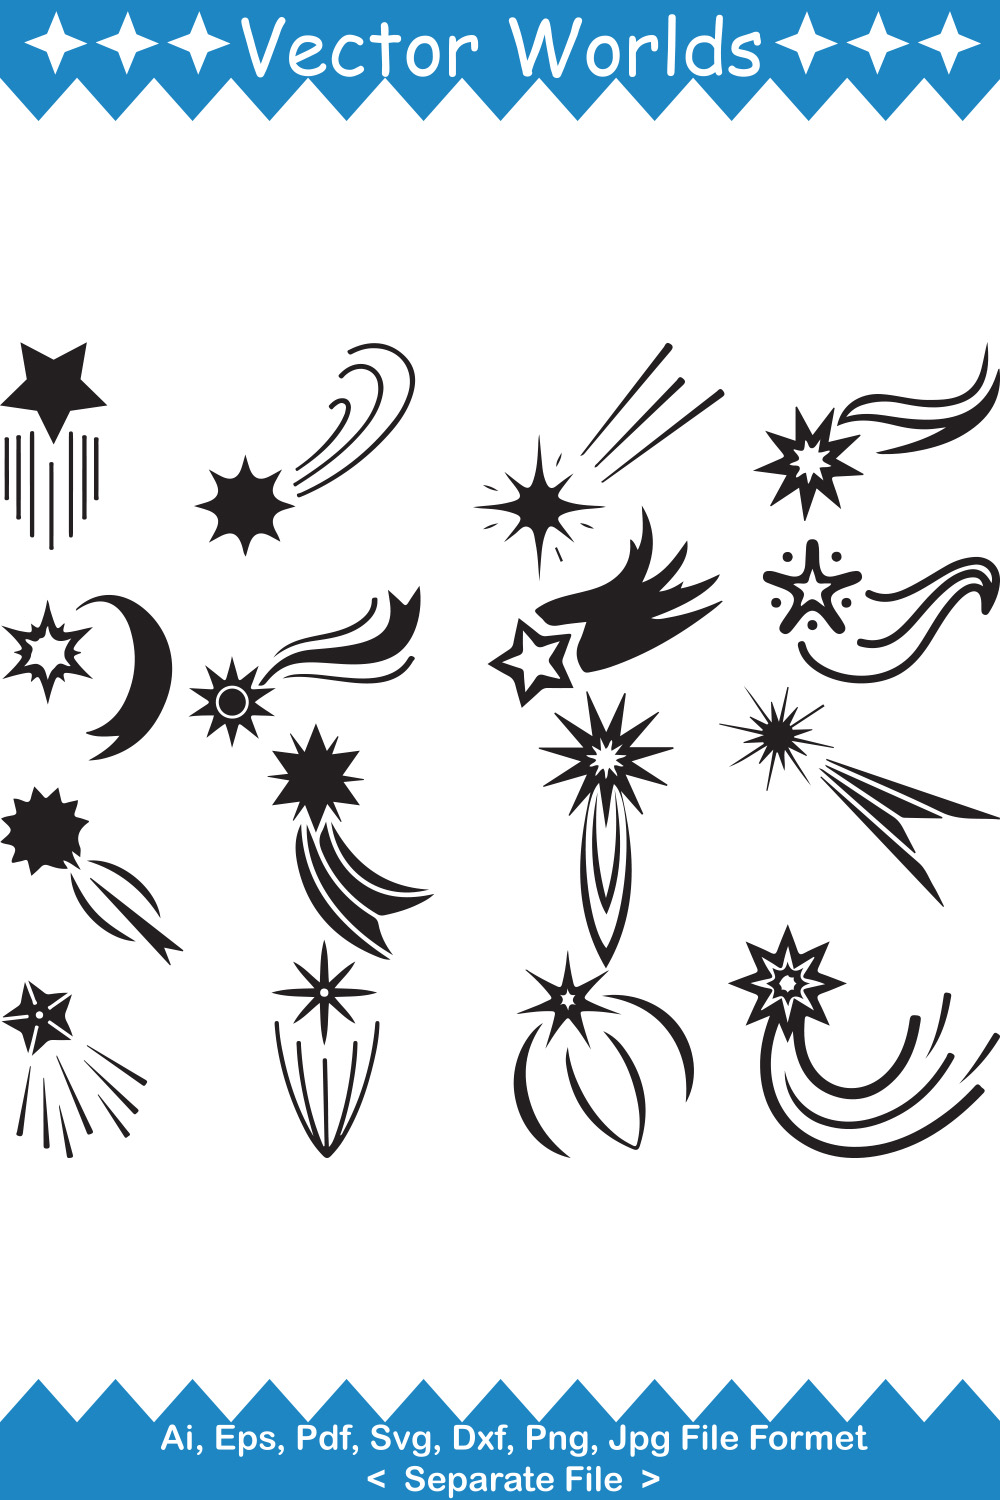 Pack of vector amazing images of flat falling star silhouettes.